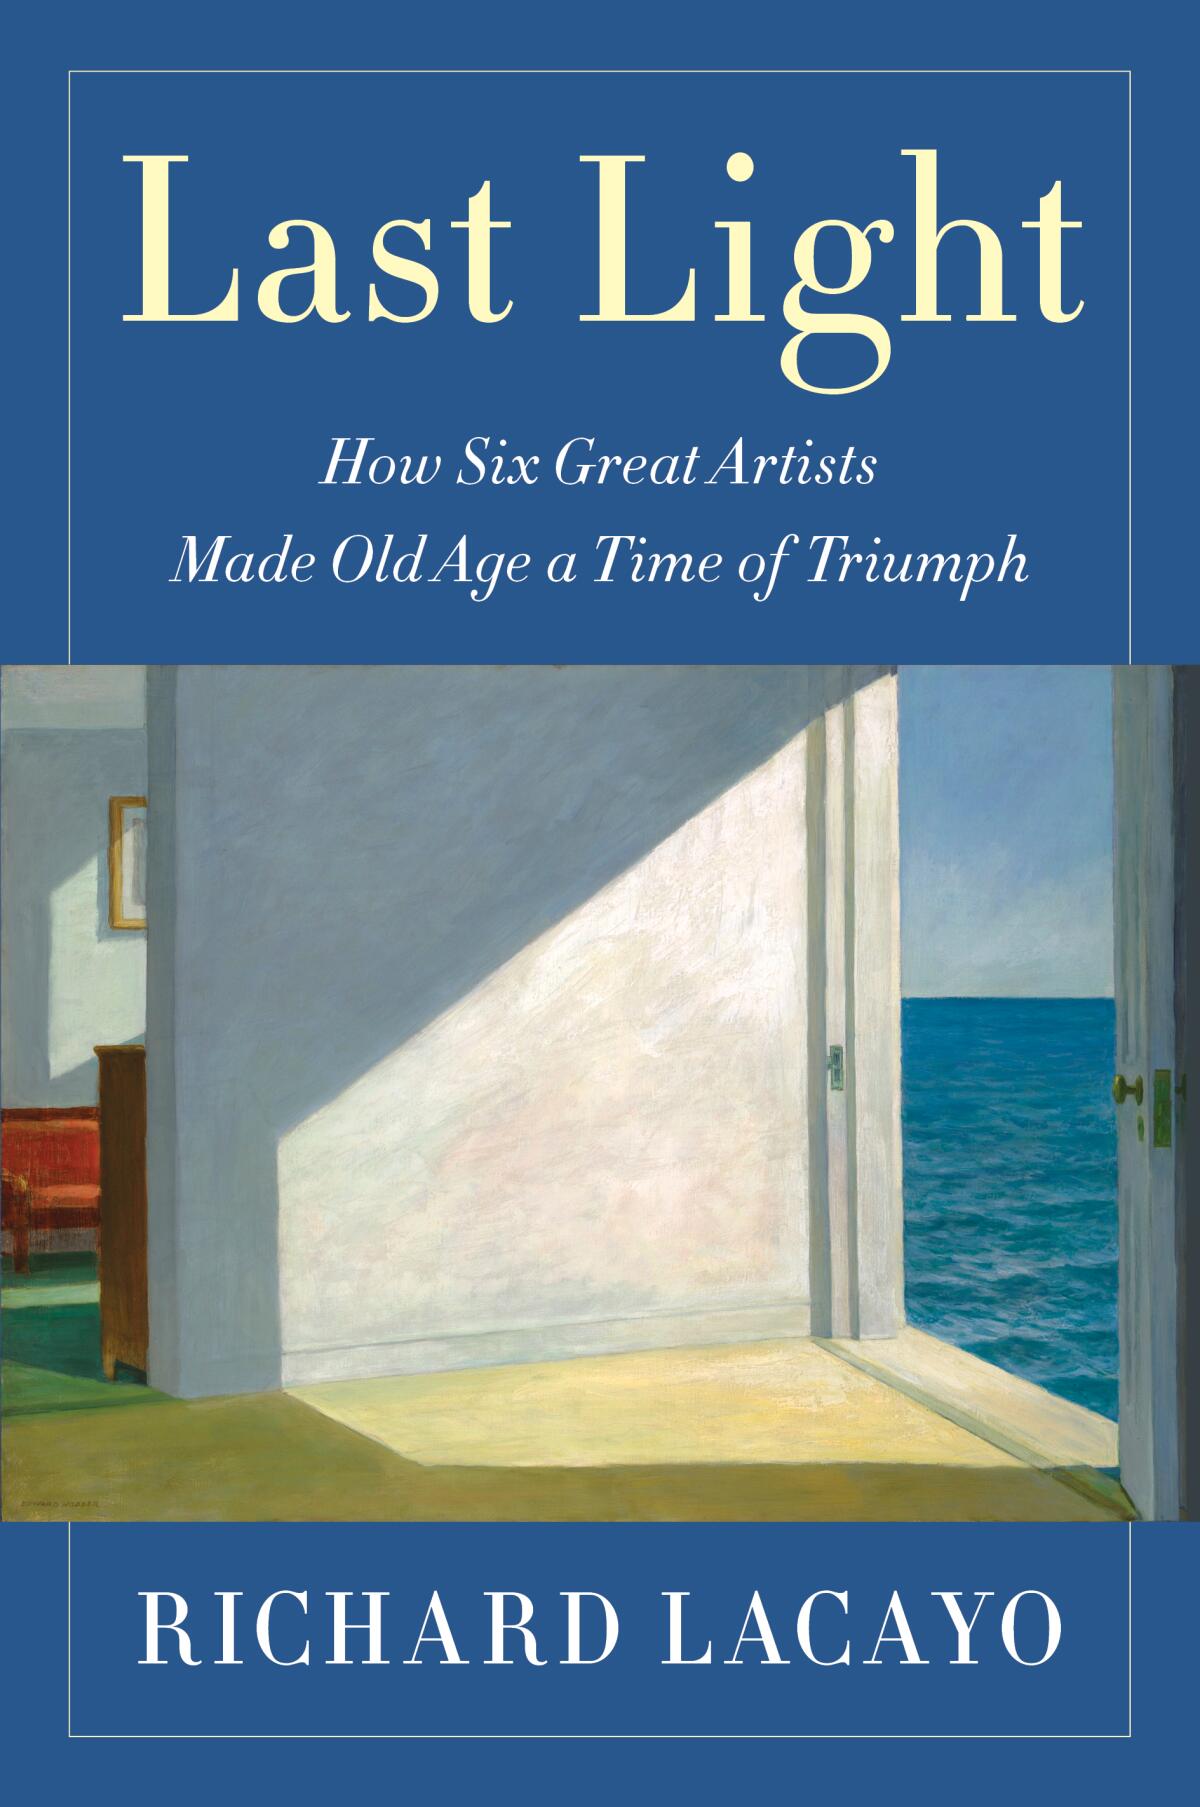 A blue book cover shows a painting by Edward Hopper in which a shafts of light enter a room through a door and a window